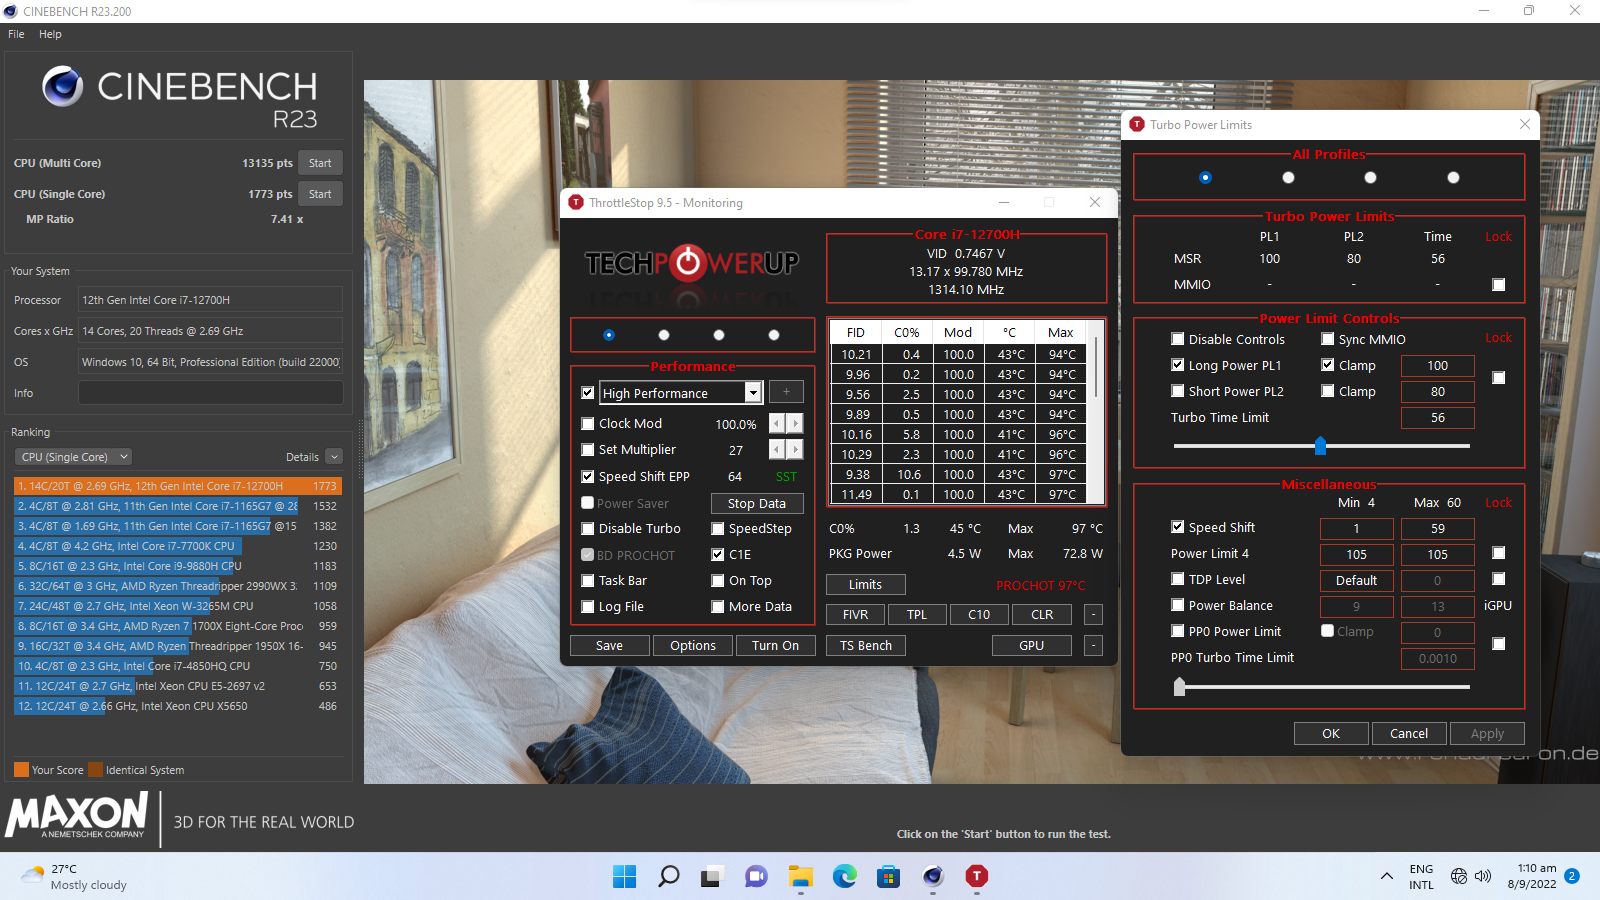 ASUS ExpertCenter PN64 Mini PC Cinebench R23 Power Limits Removed